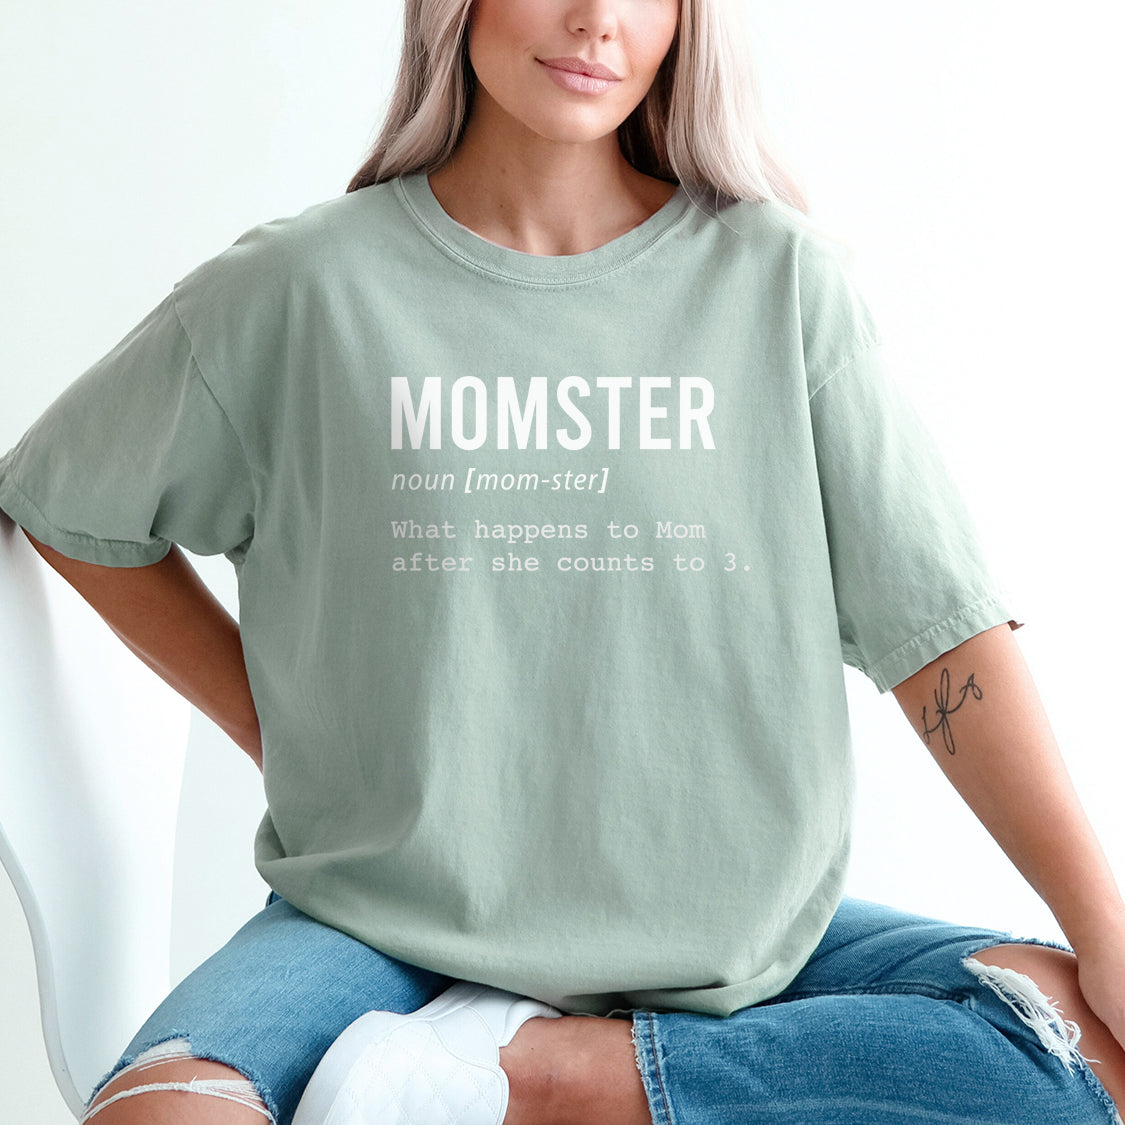 Funny Definition of Momster T-shirt - Funny Family Retro Vintage Design Printed T-Shirt